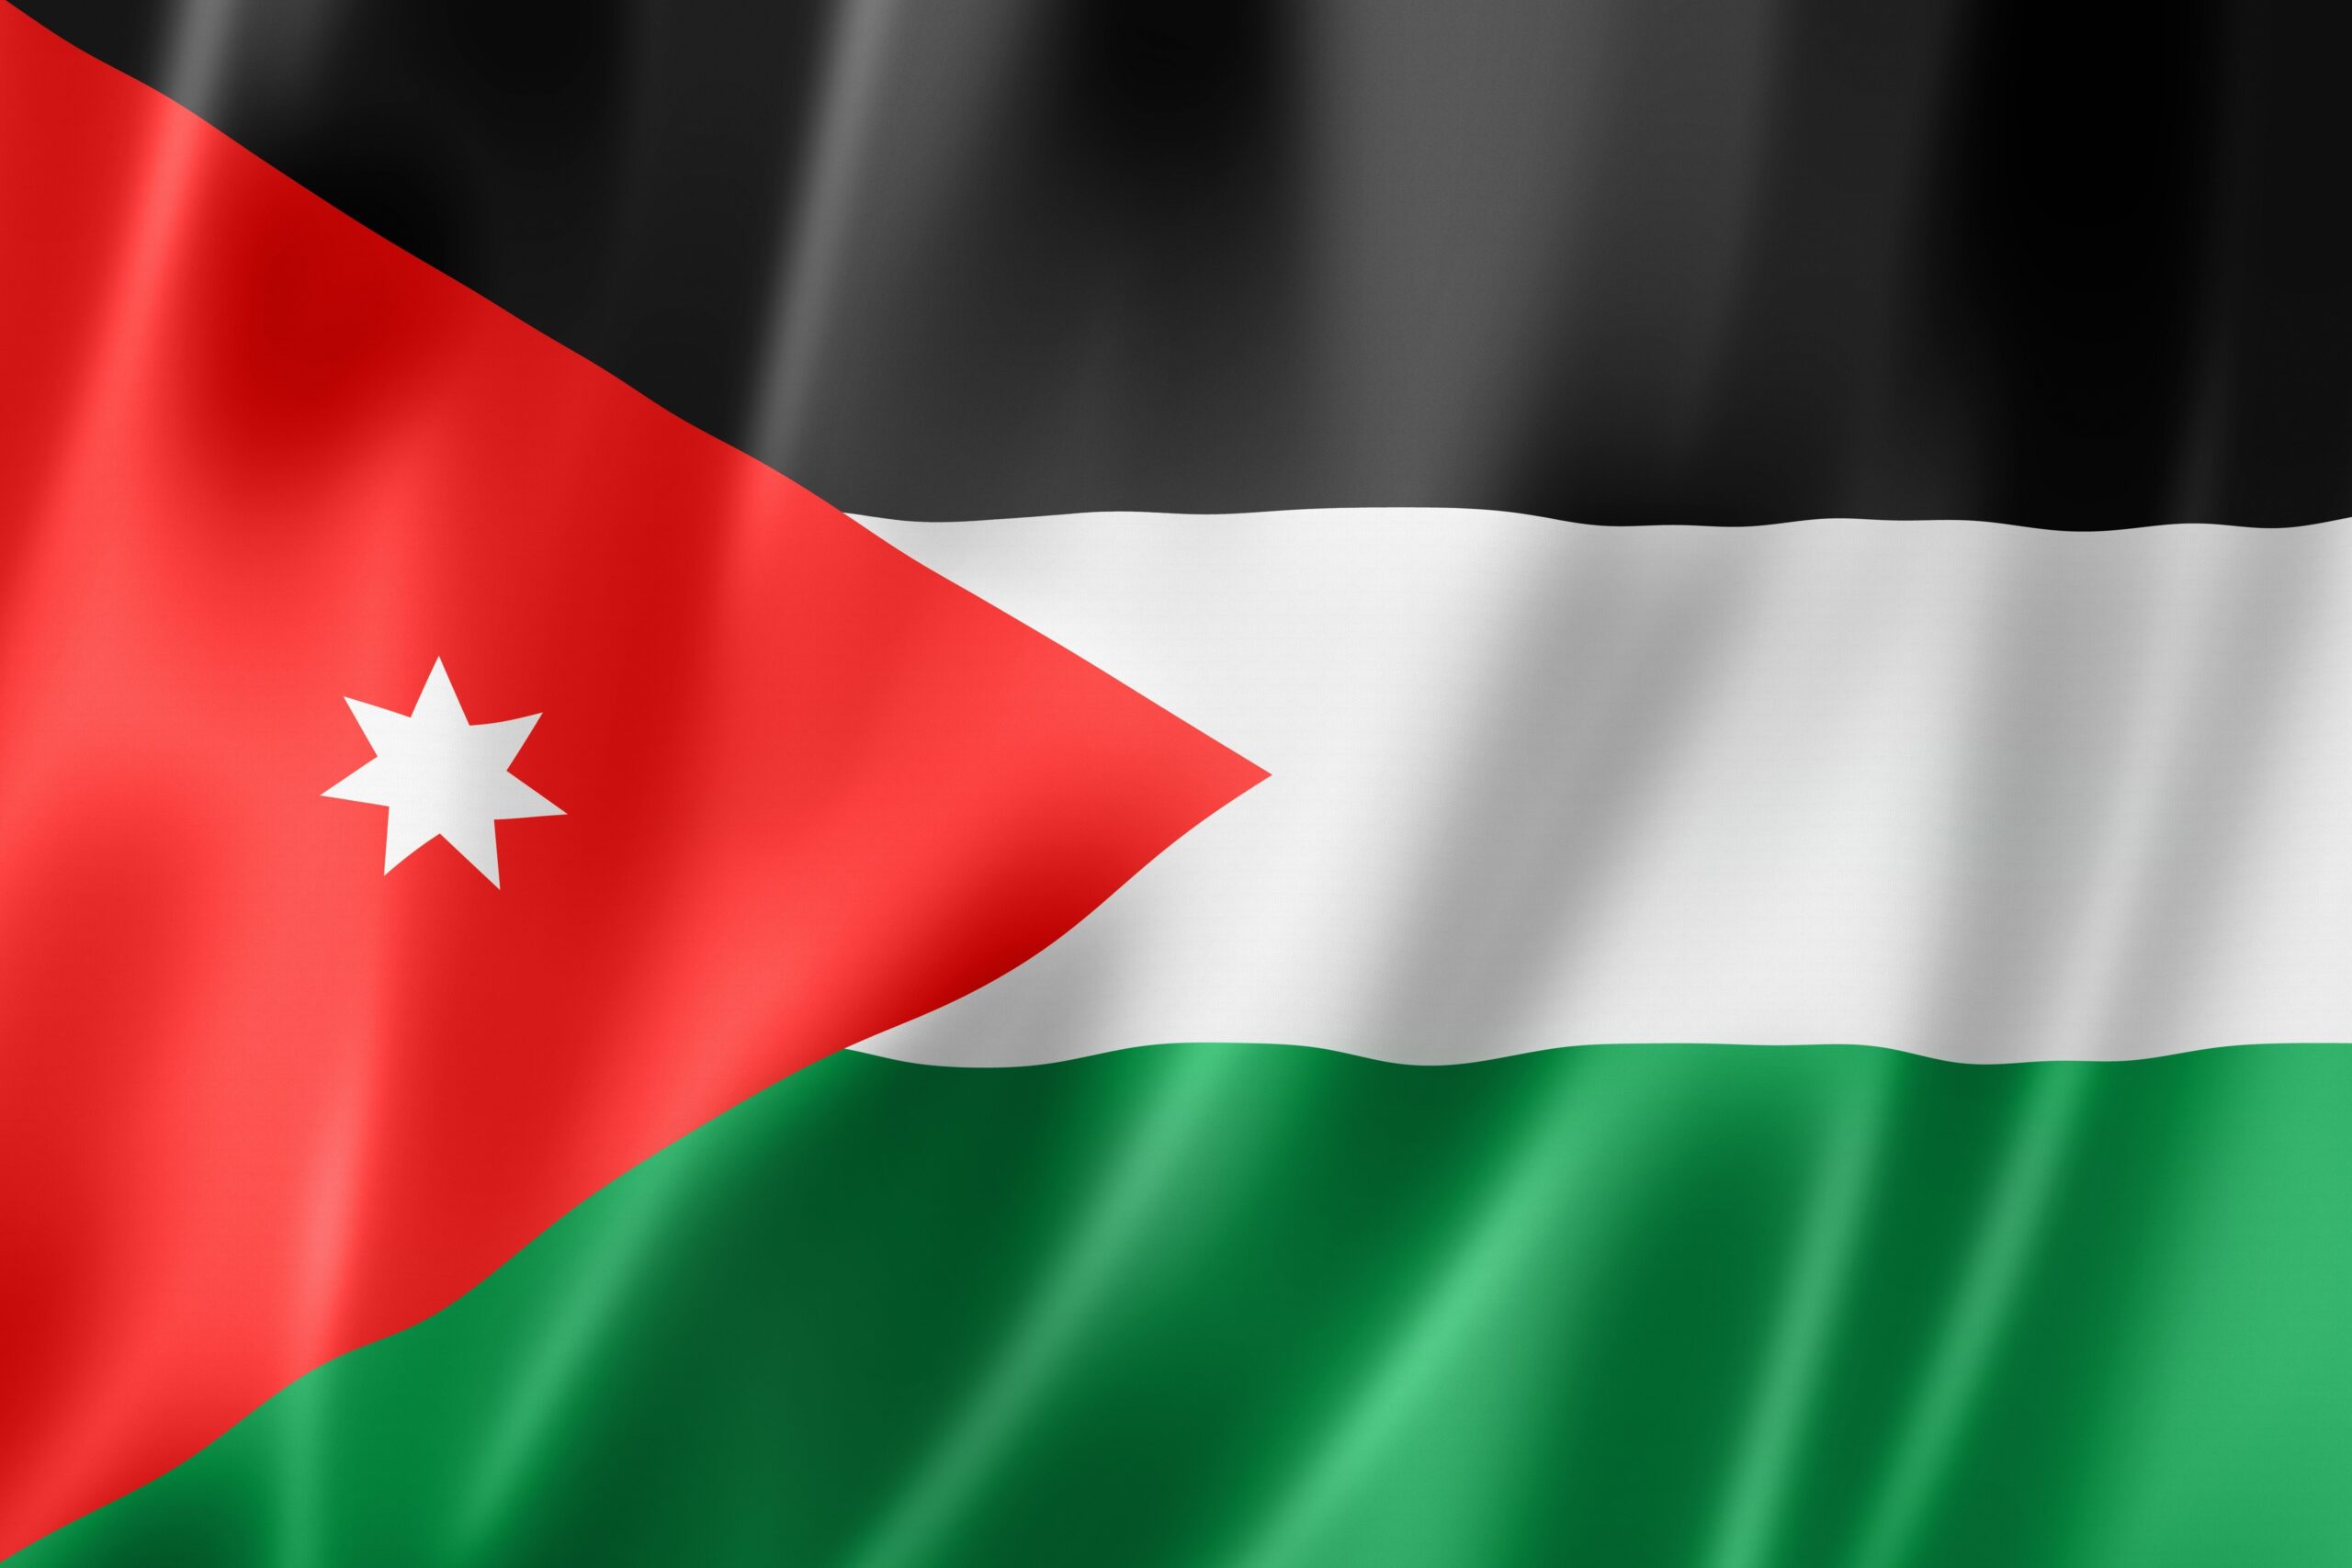 Flag of Jordan, officially adopted on April , is based on the